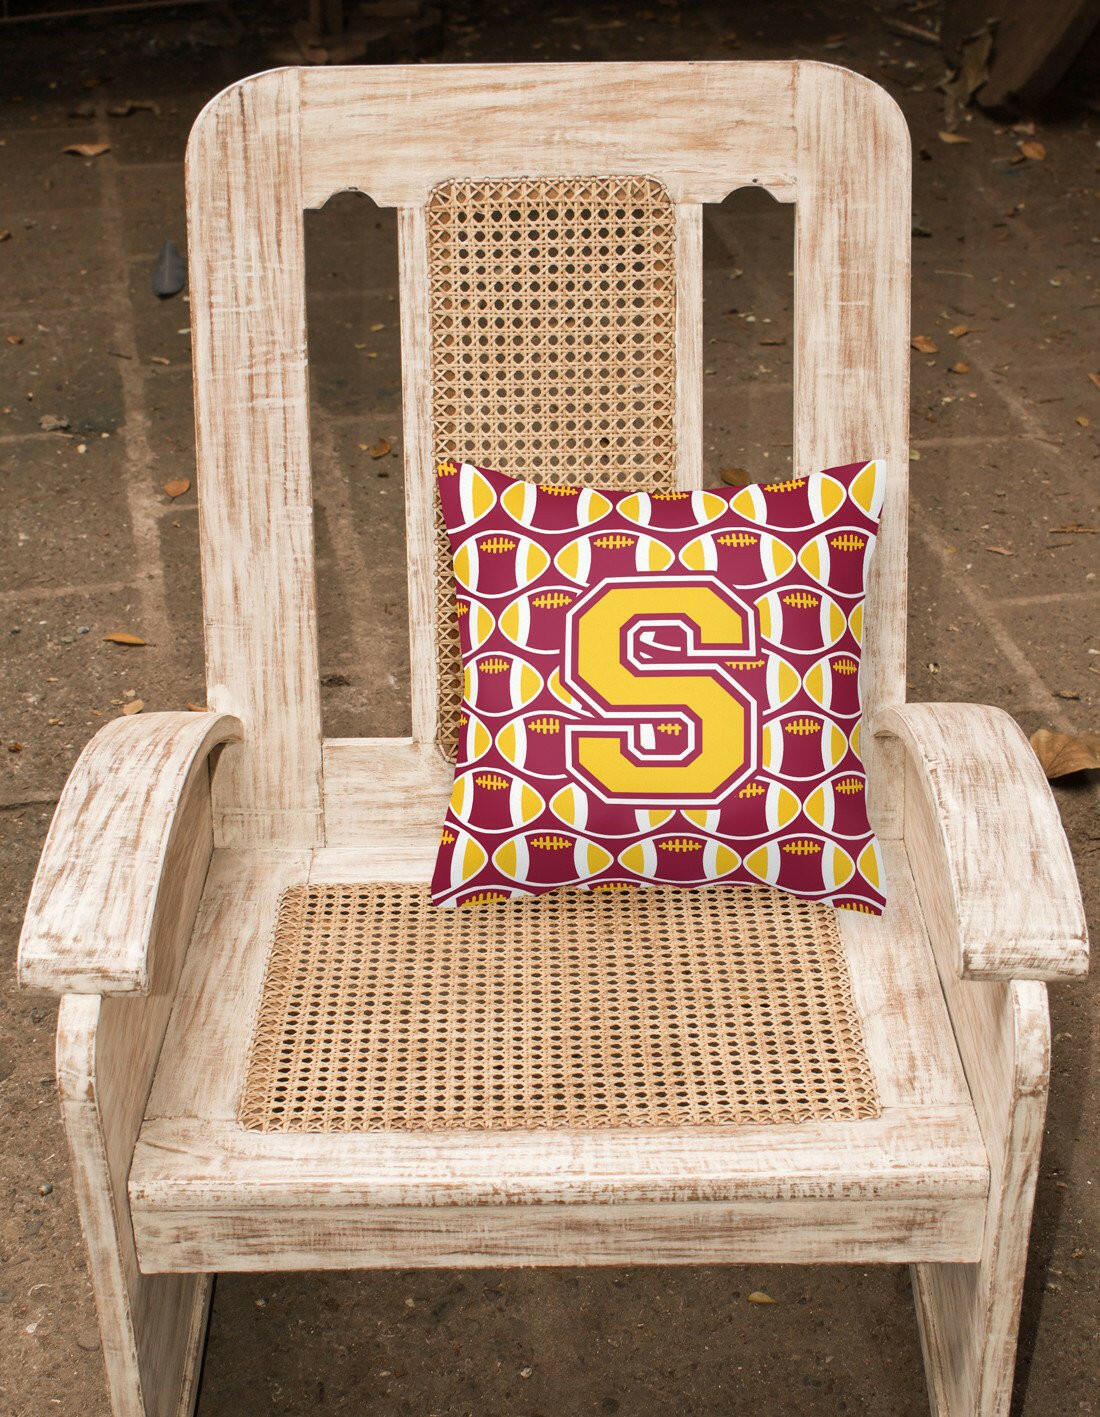 Letter S Football Maroon and Gold Fabric Decorative Pillow CJ1081-SPW1414 by Caroline's Treasures